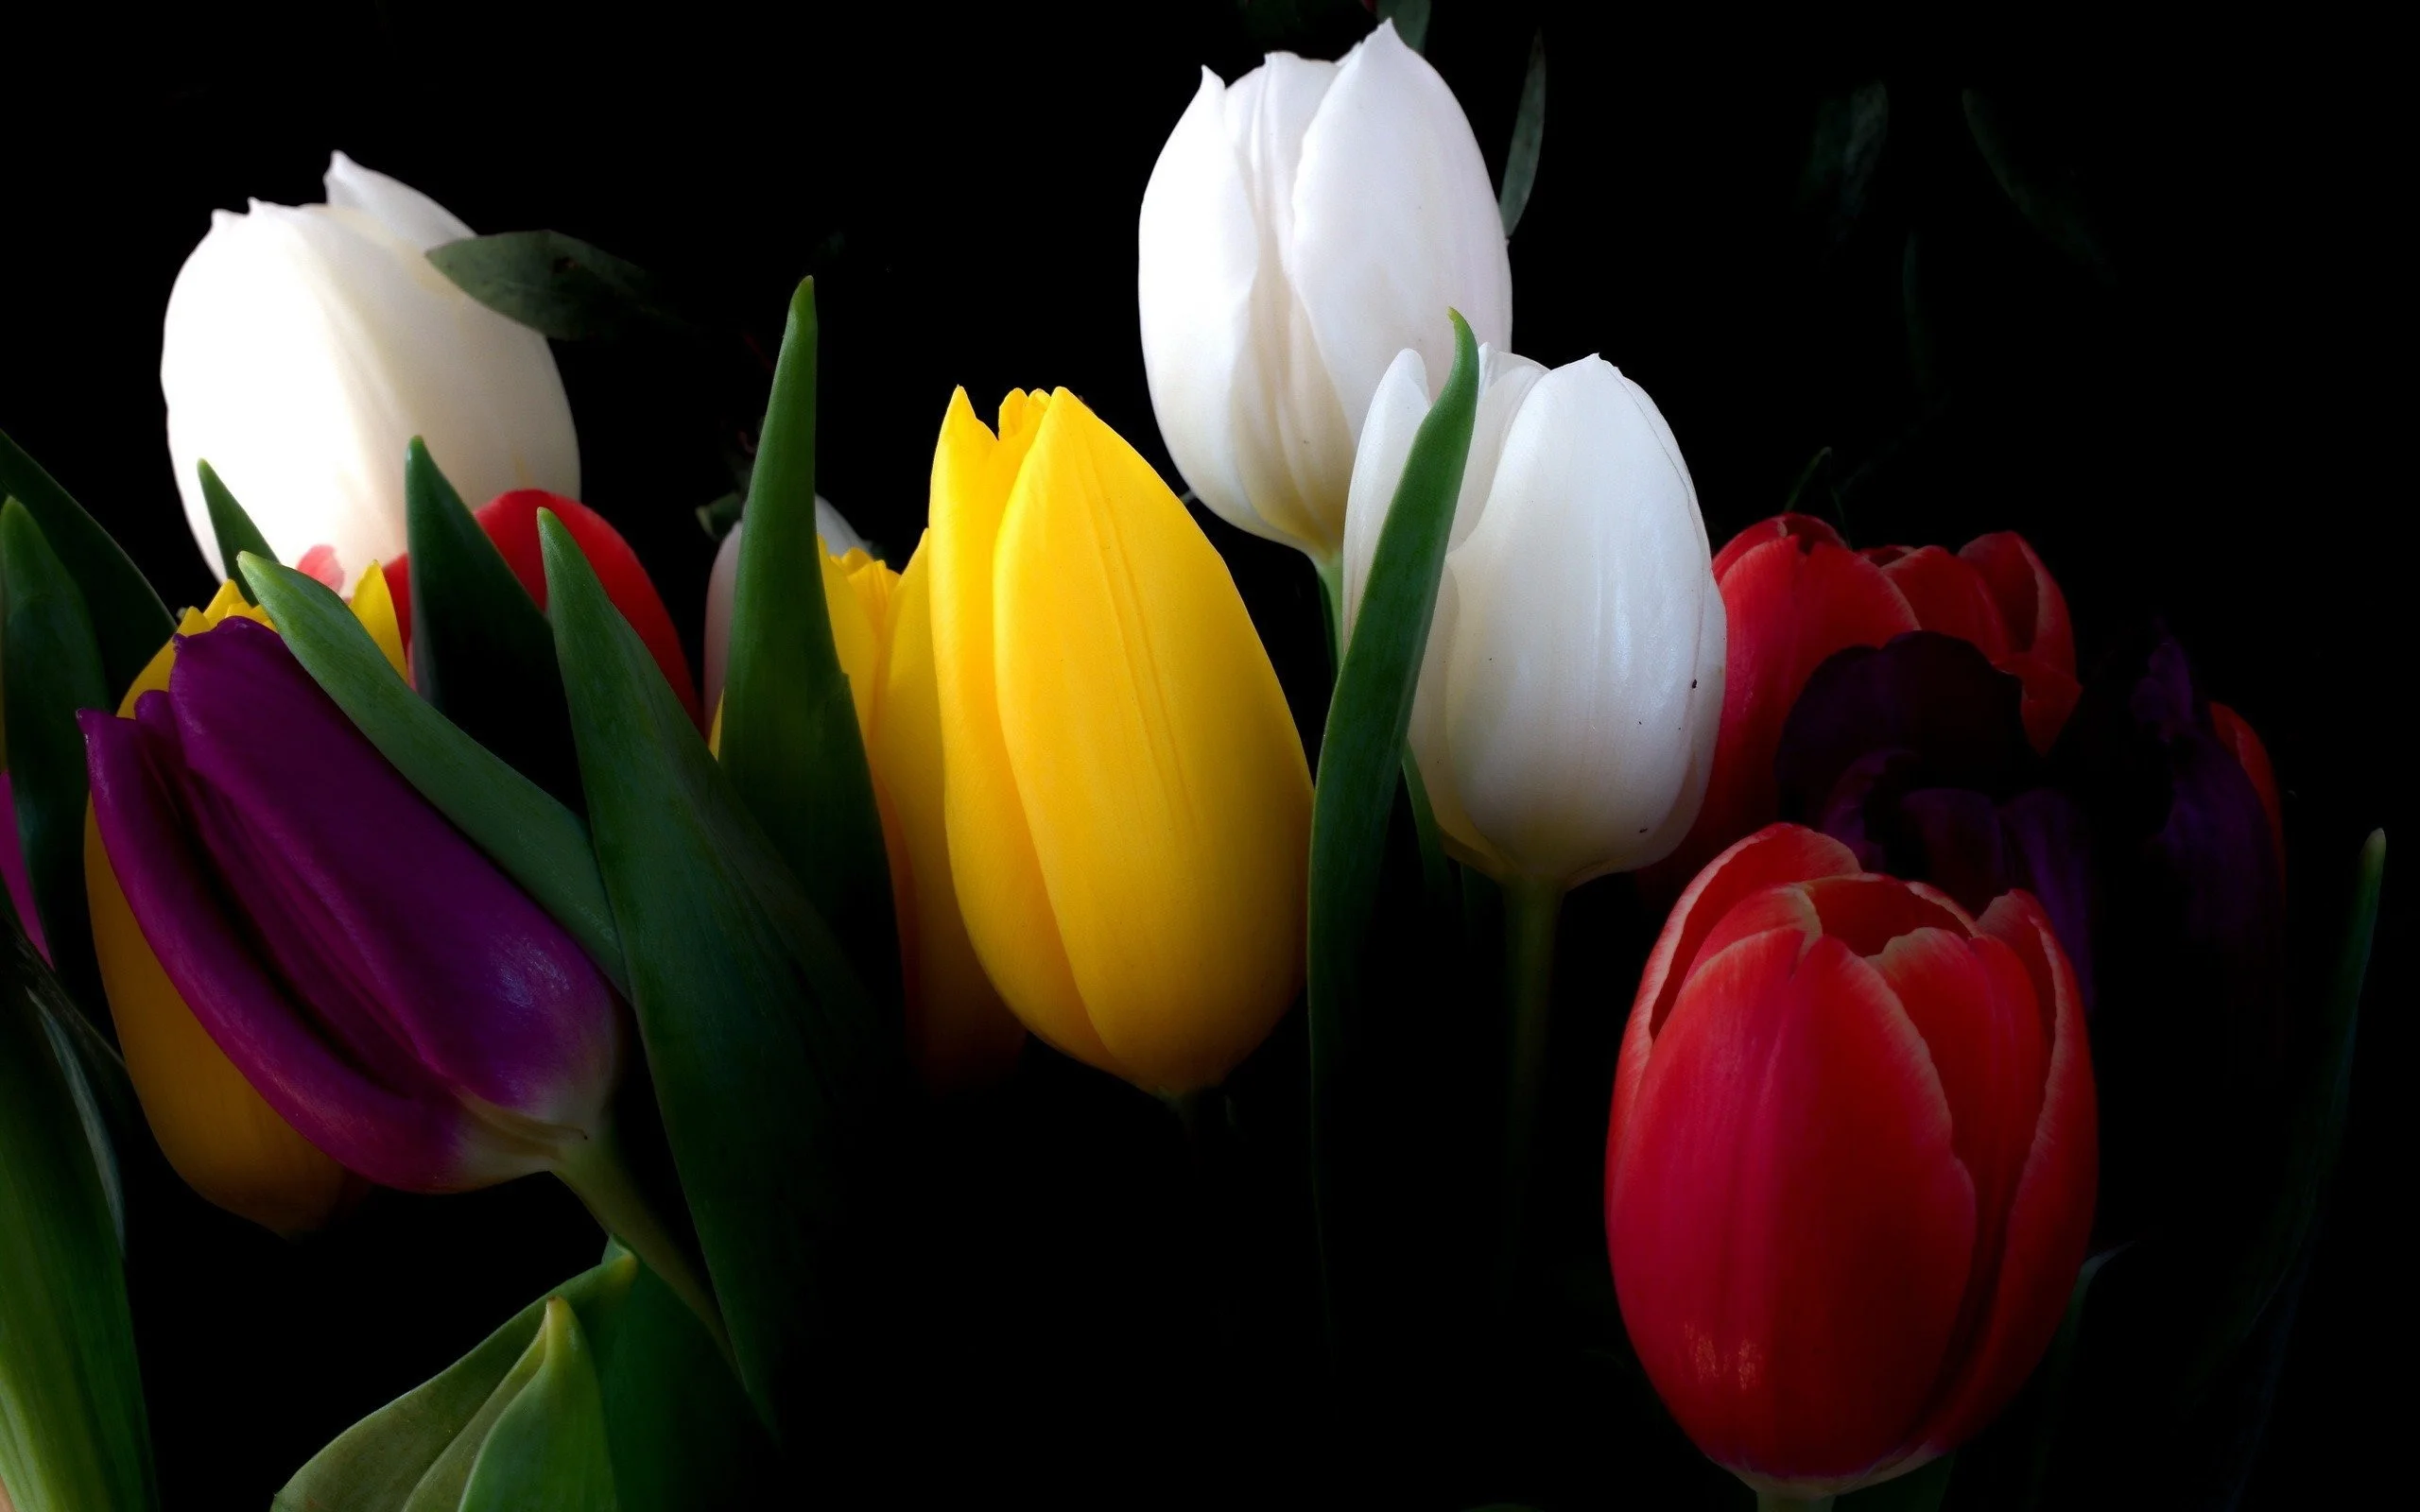 Nature flowers tulips black background wallpaper | | 258969 |  WallpaperUP